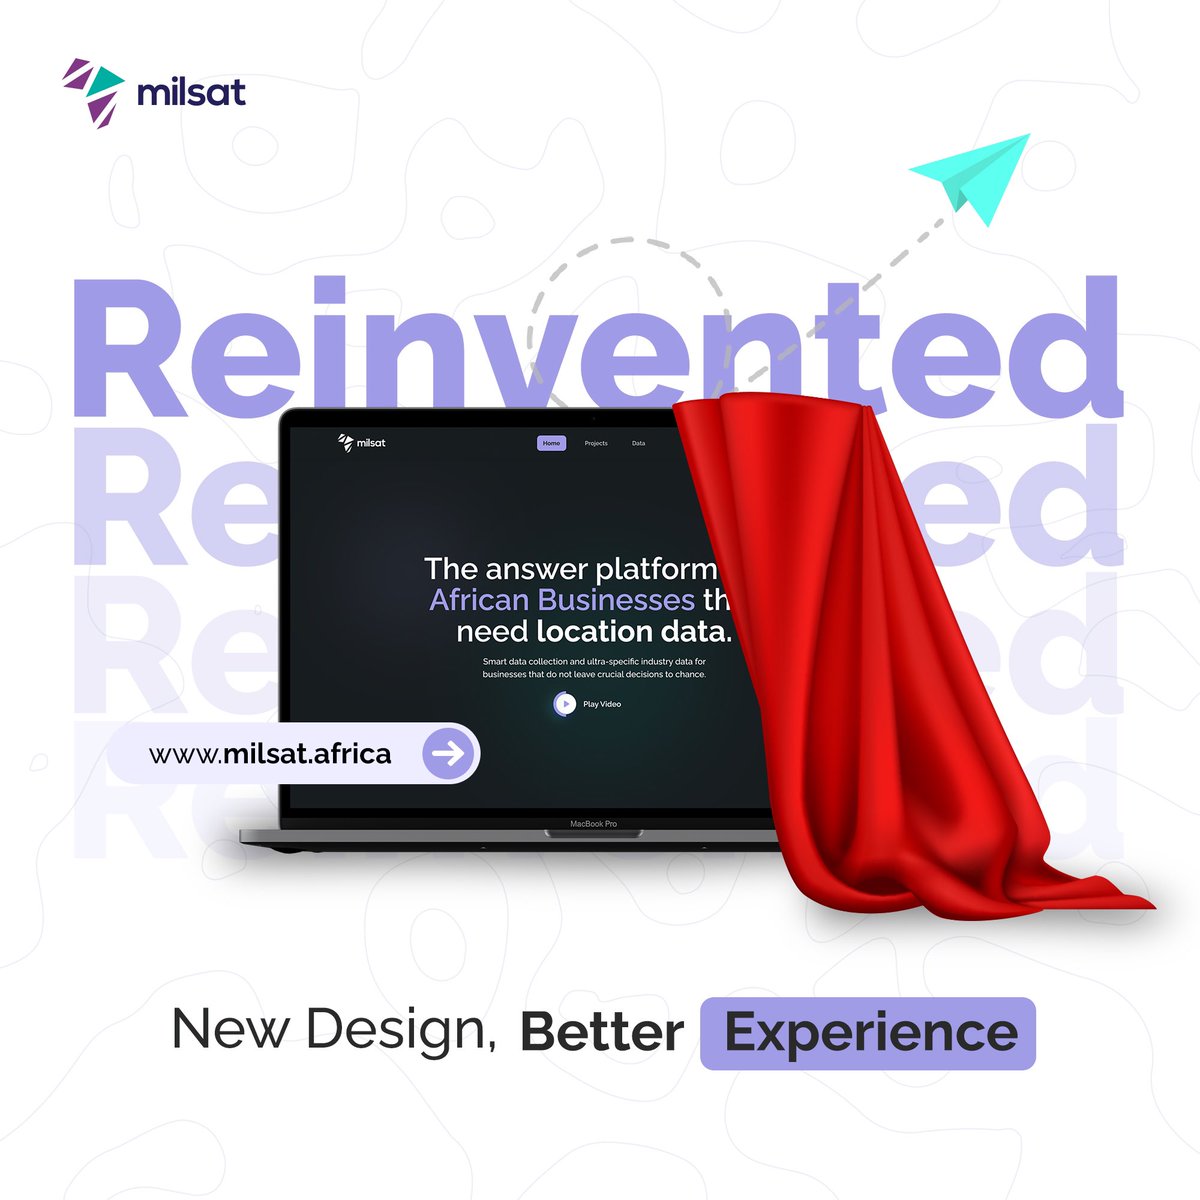 We are thrilled to show you the new Milsat website, that comes with a better experience. Visit Milsat.Africa to get more details #theReinventionStory #datacollection #datacollectiontools #datacollectionsystem #datacollevtioncompany